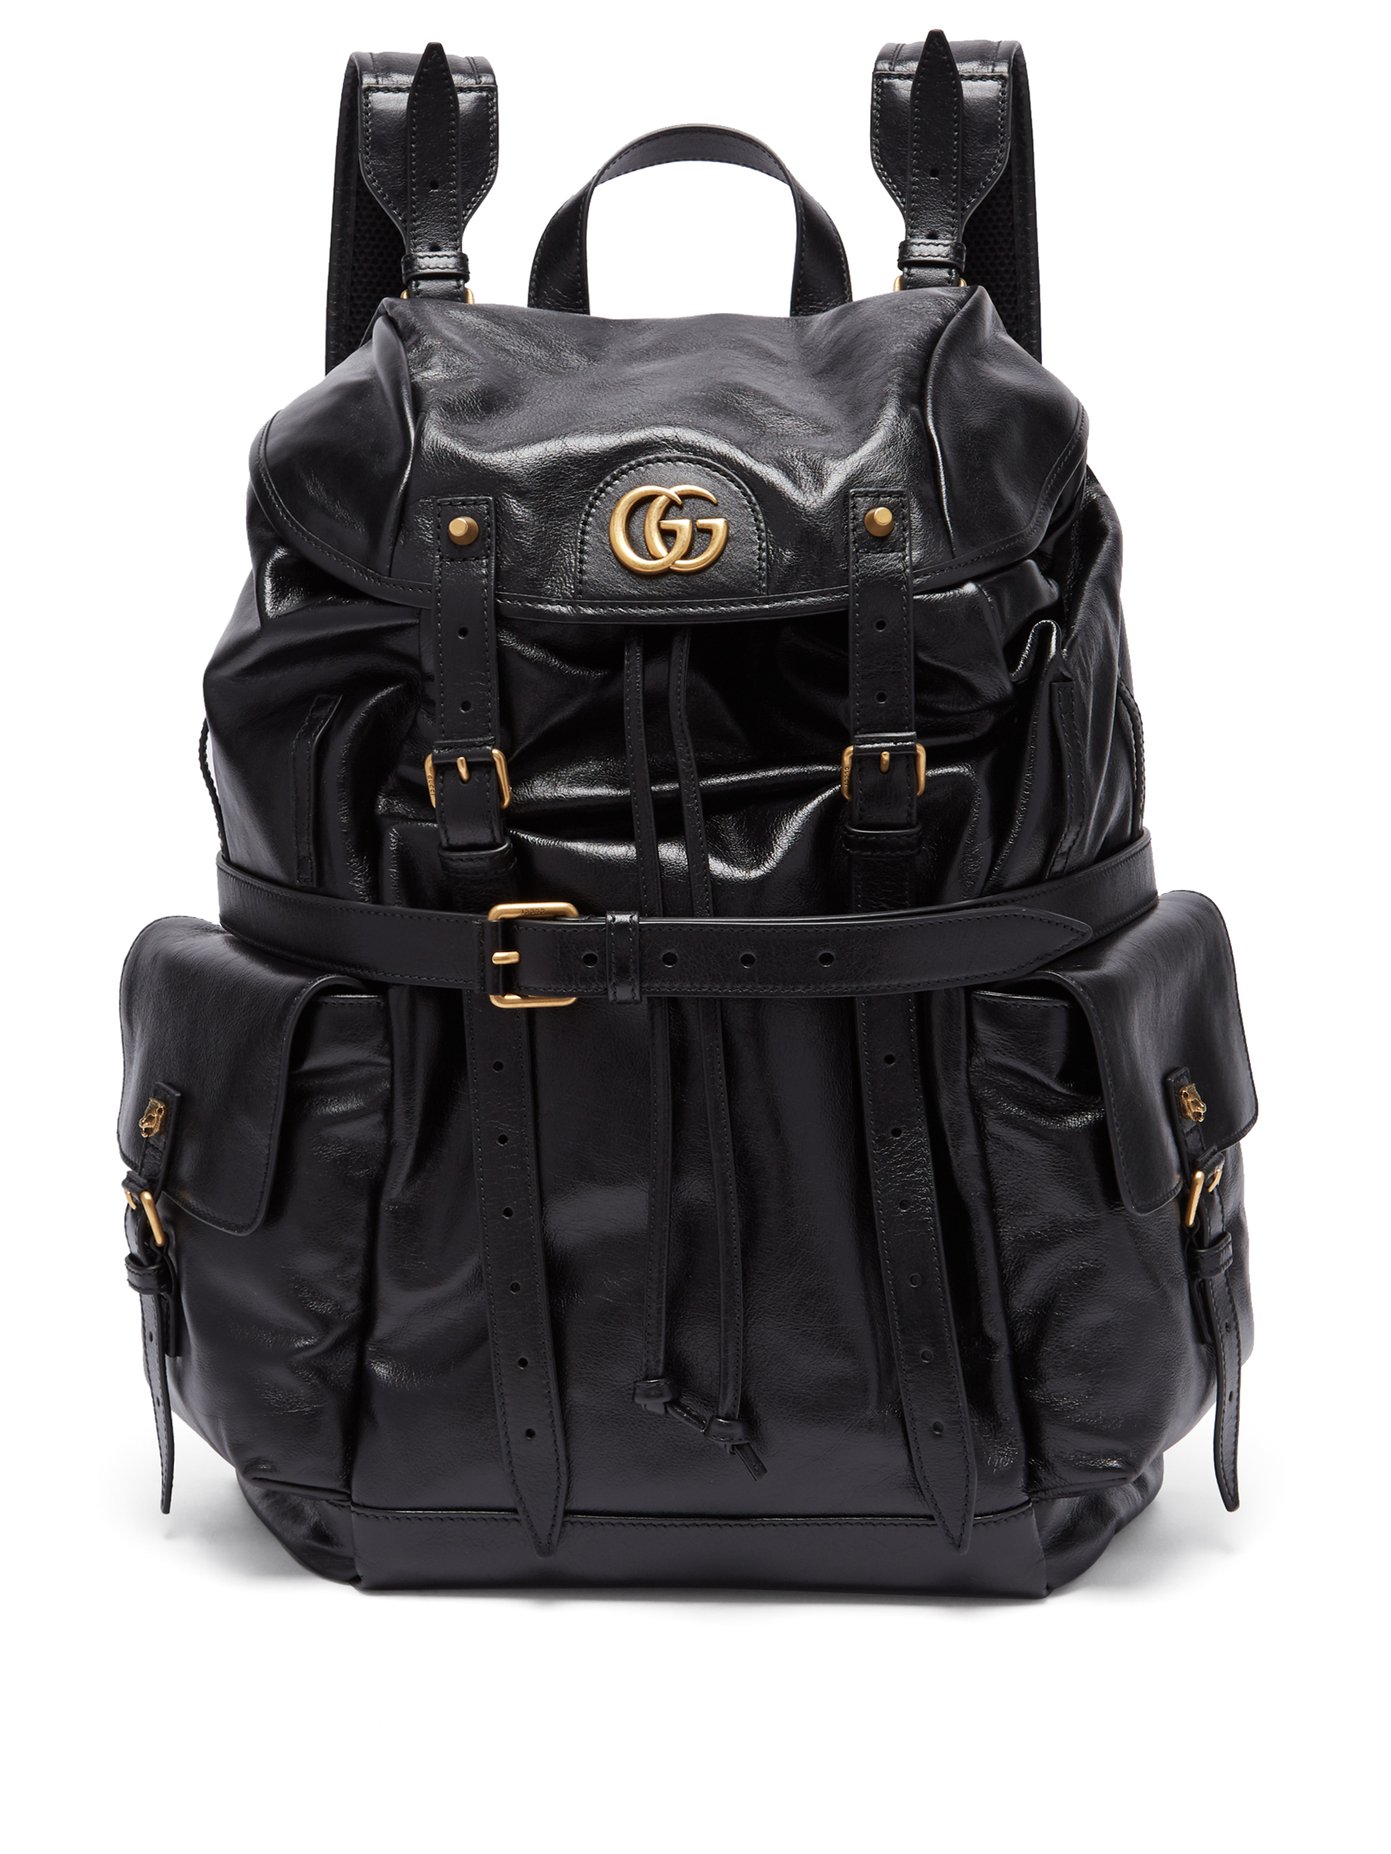 gucci mens leather backpack